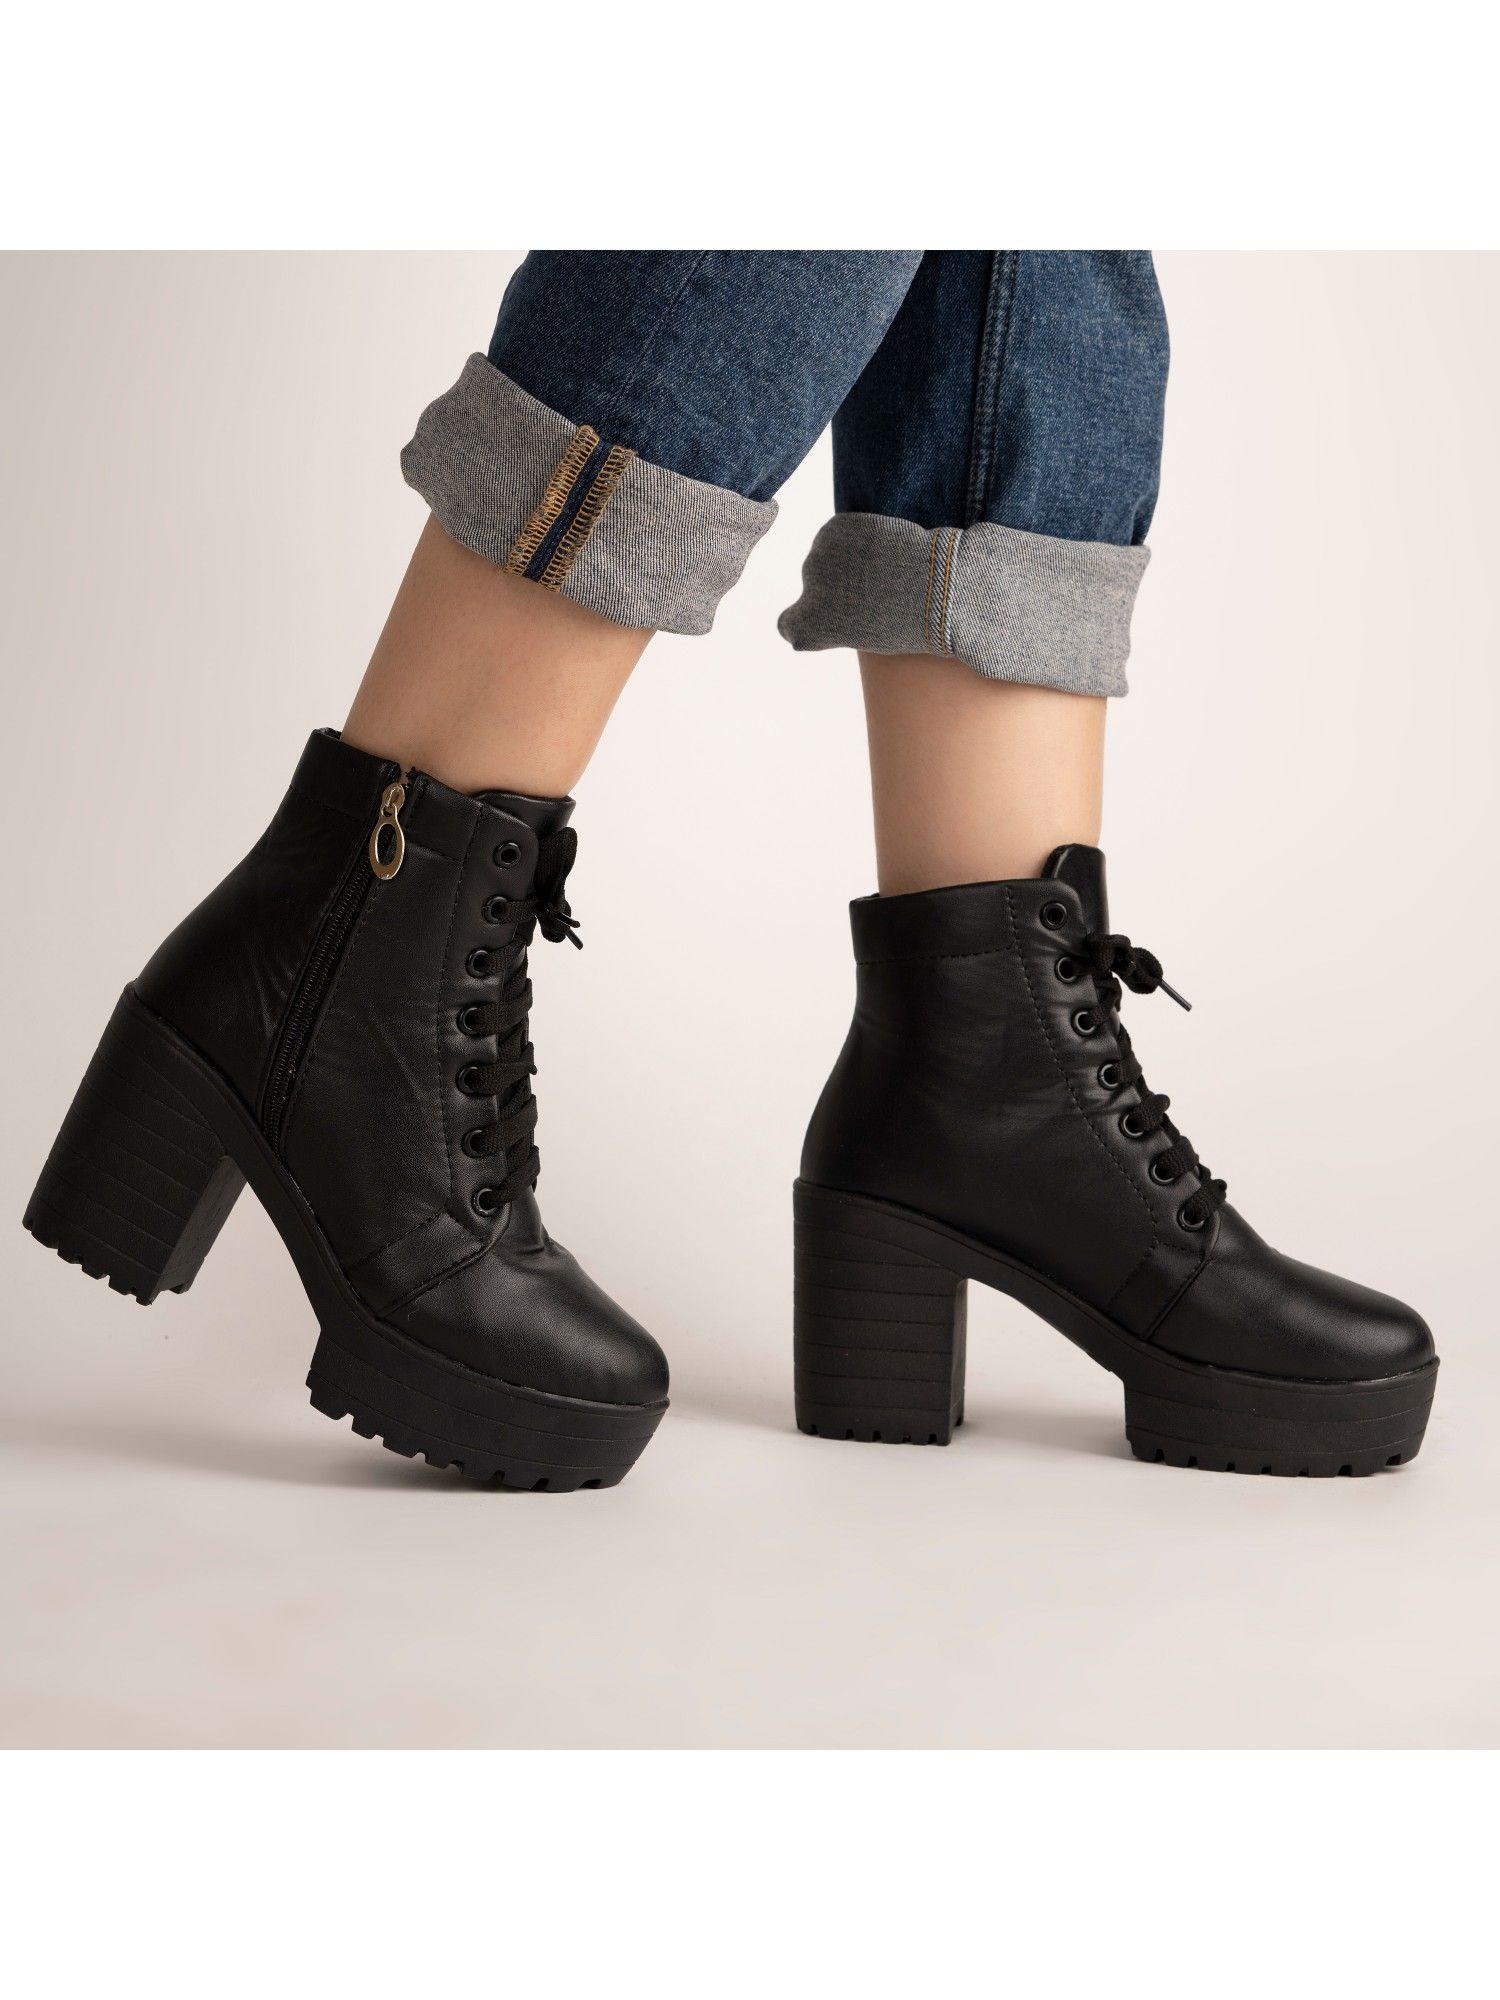 boots trendy casual party wear daily wear comfortable stylish boots for girls